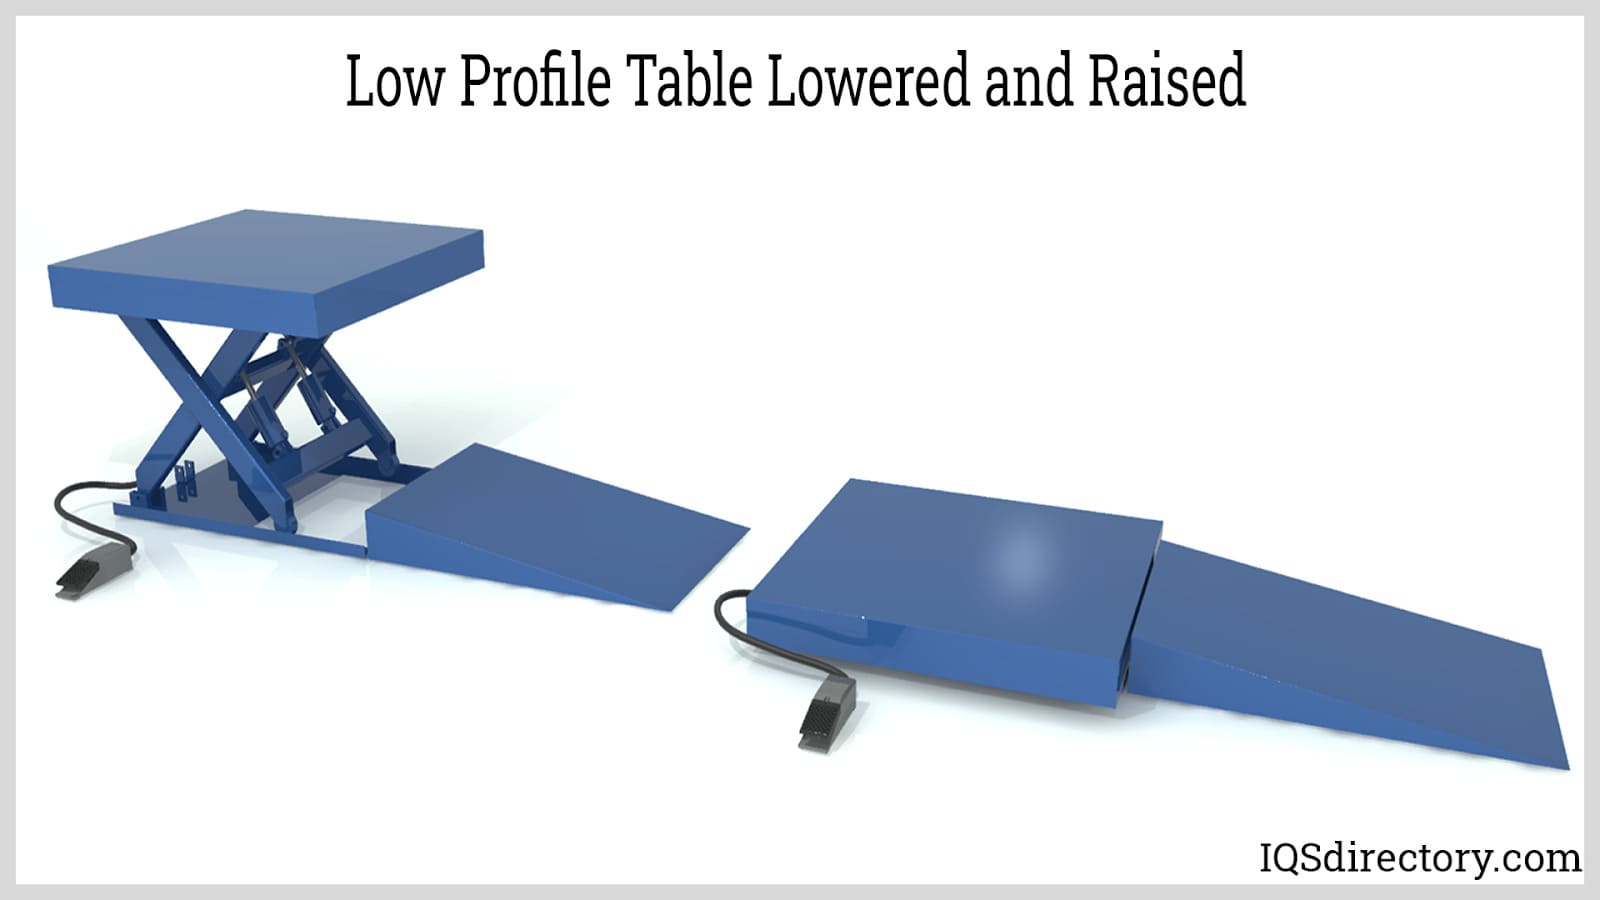 Low Profile Table Lowered and Raised